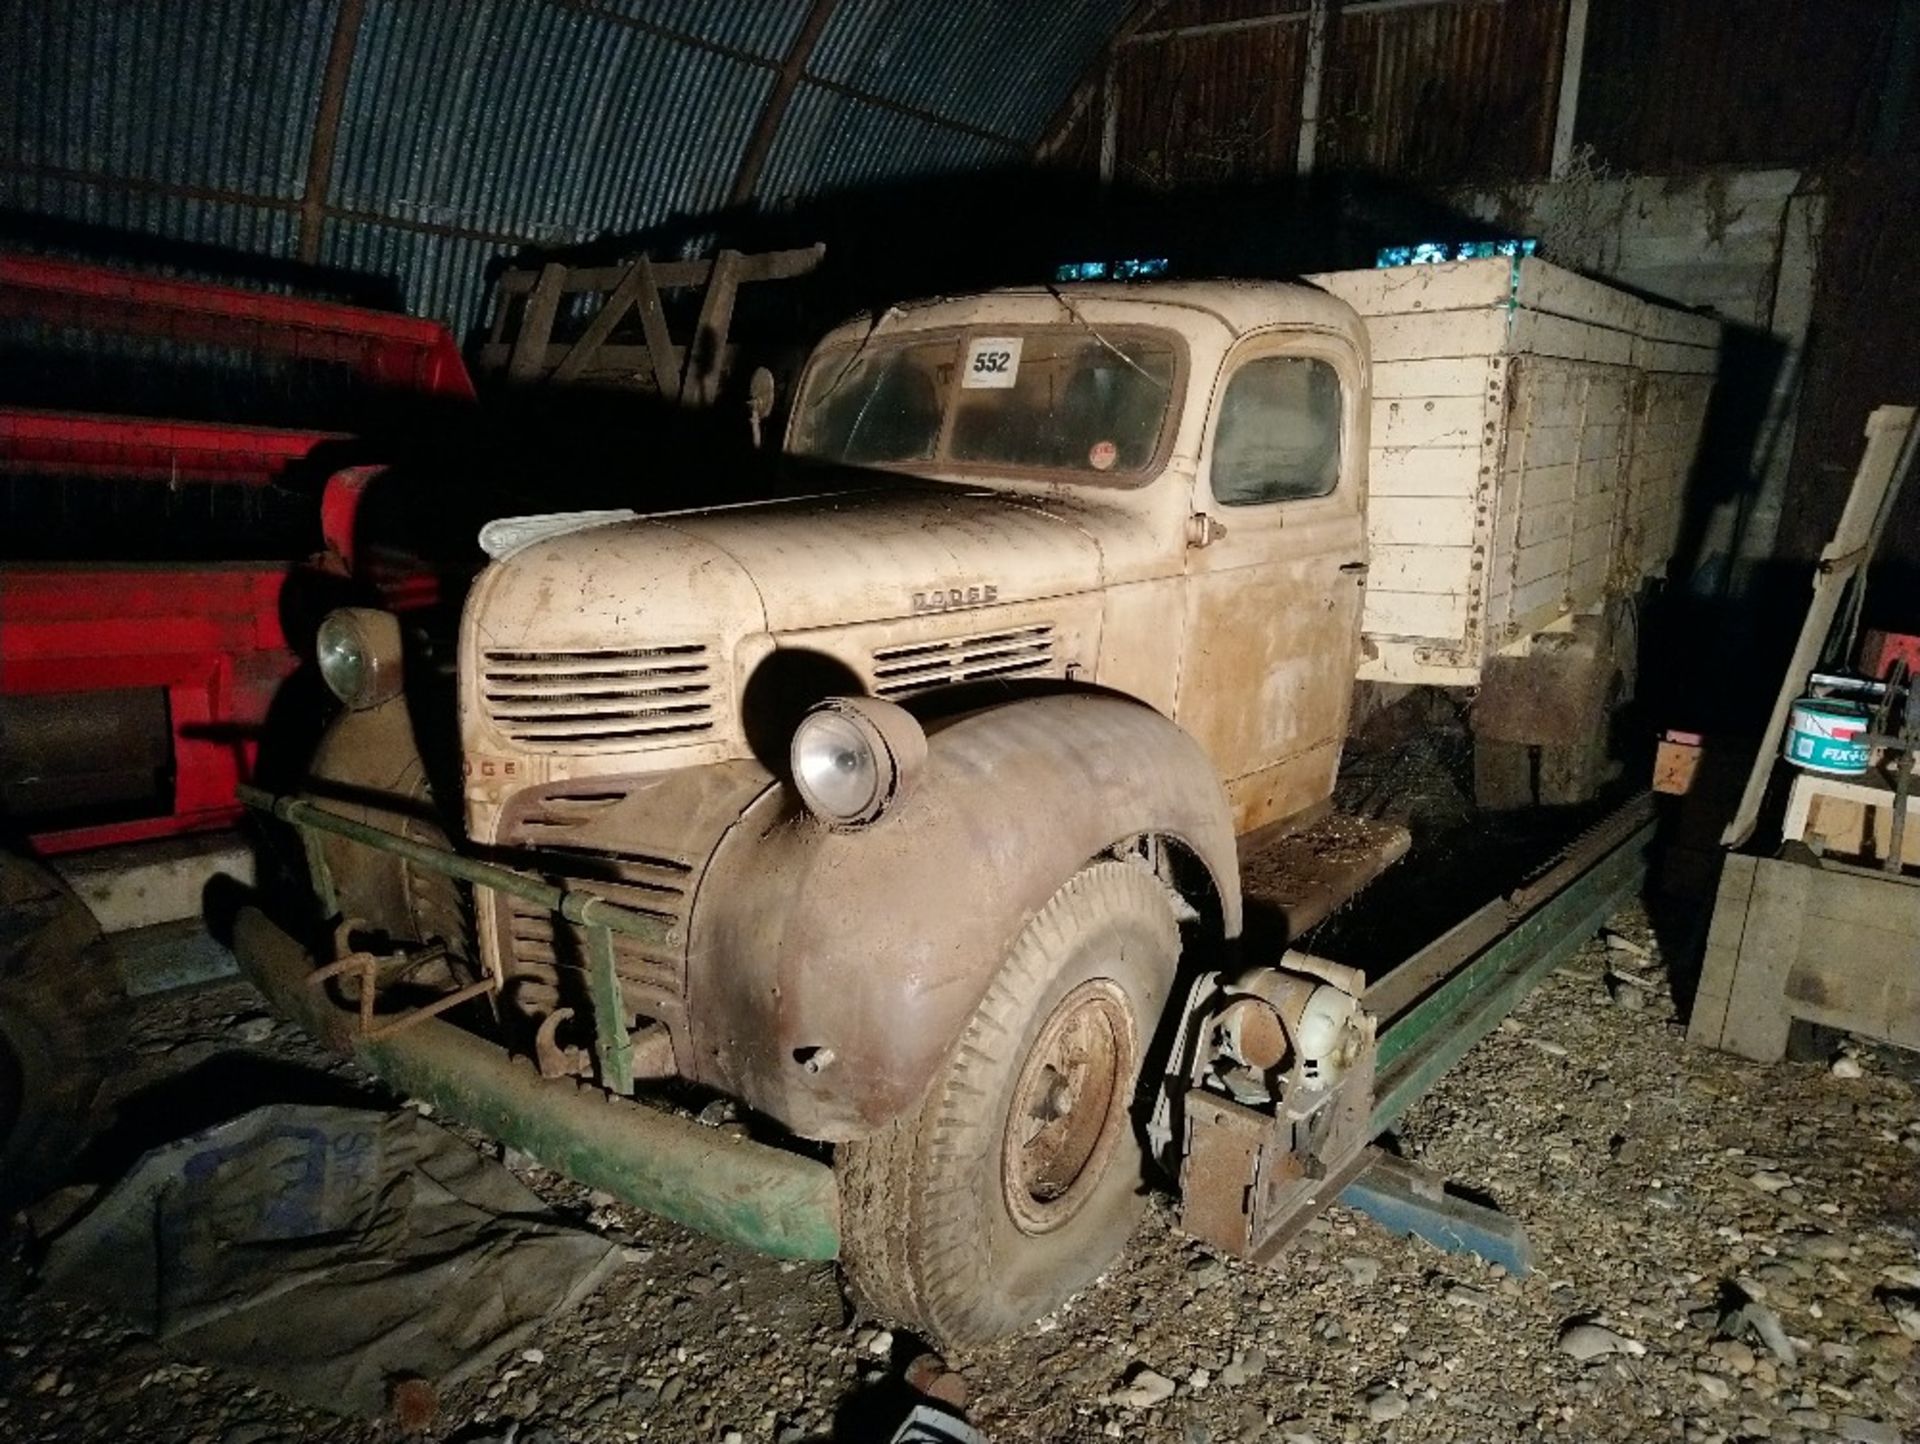 1944 Dodge Lorry Chassis Model D-60420-C-T, Cab Model 21, Chassis Serial No. 91075.